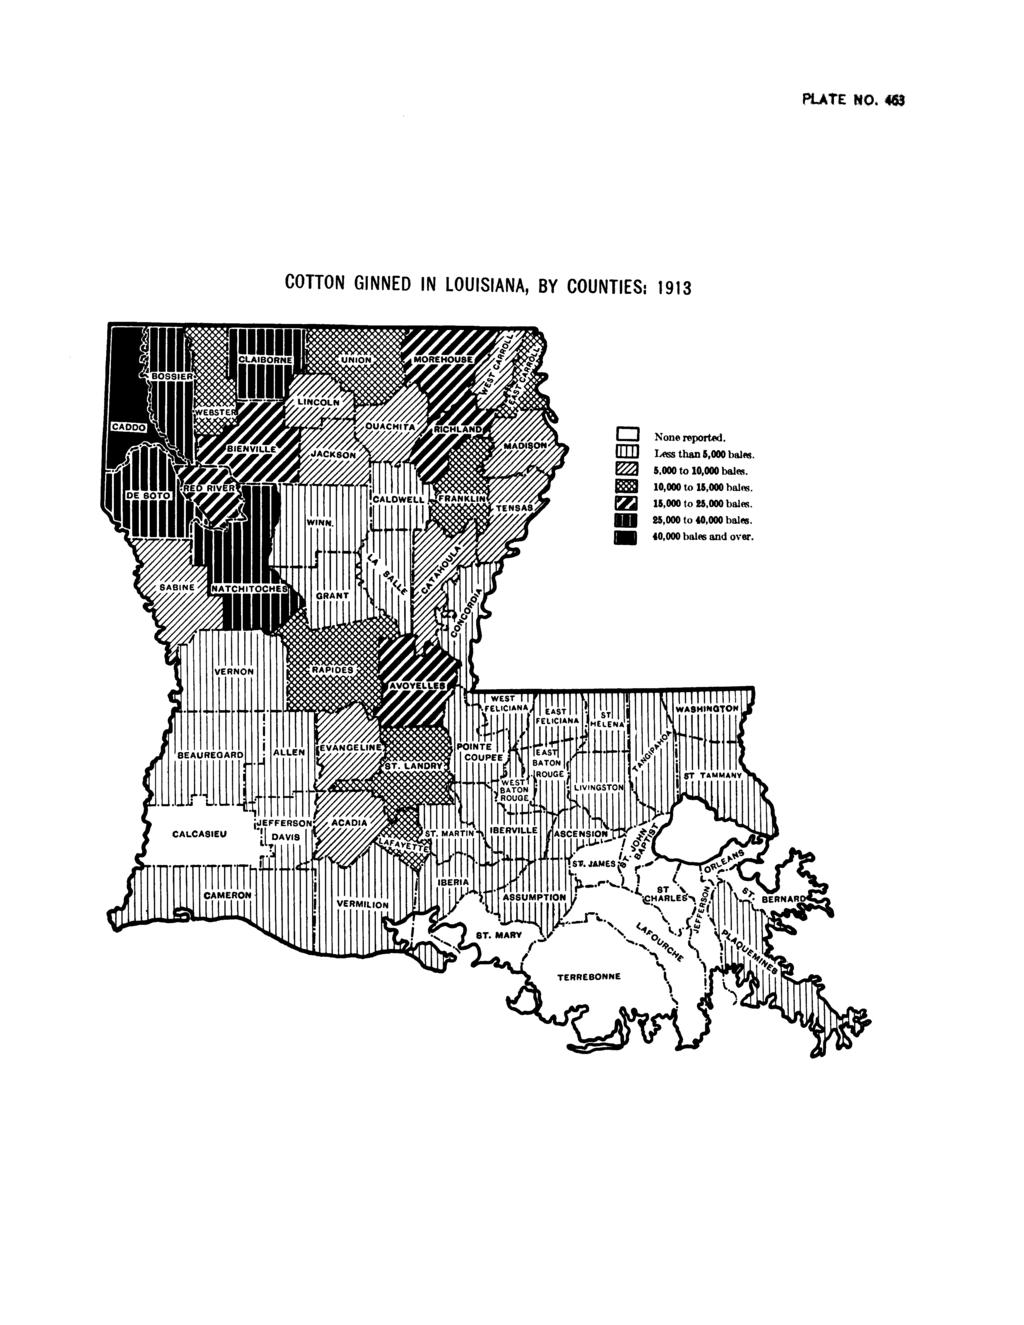 PLATE NO. m COTTON GINNED IN LOUISIANA, BY COUNTIES: 1913. Non reported. E D Less than 5,000 balm.